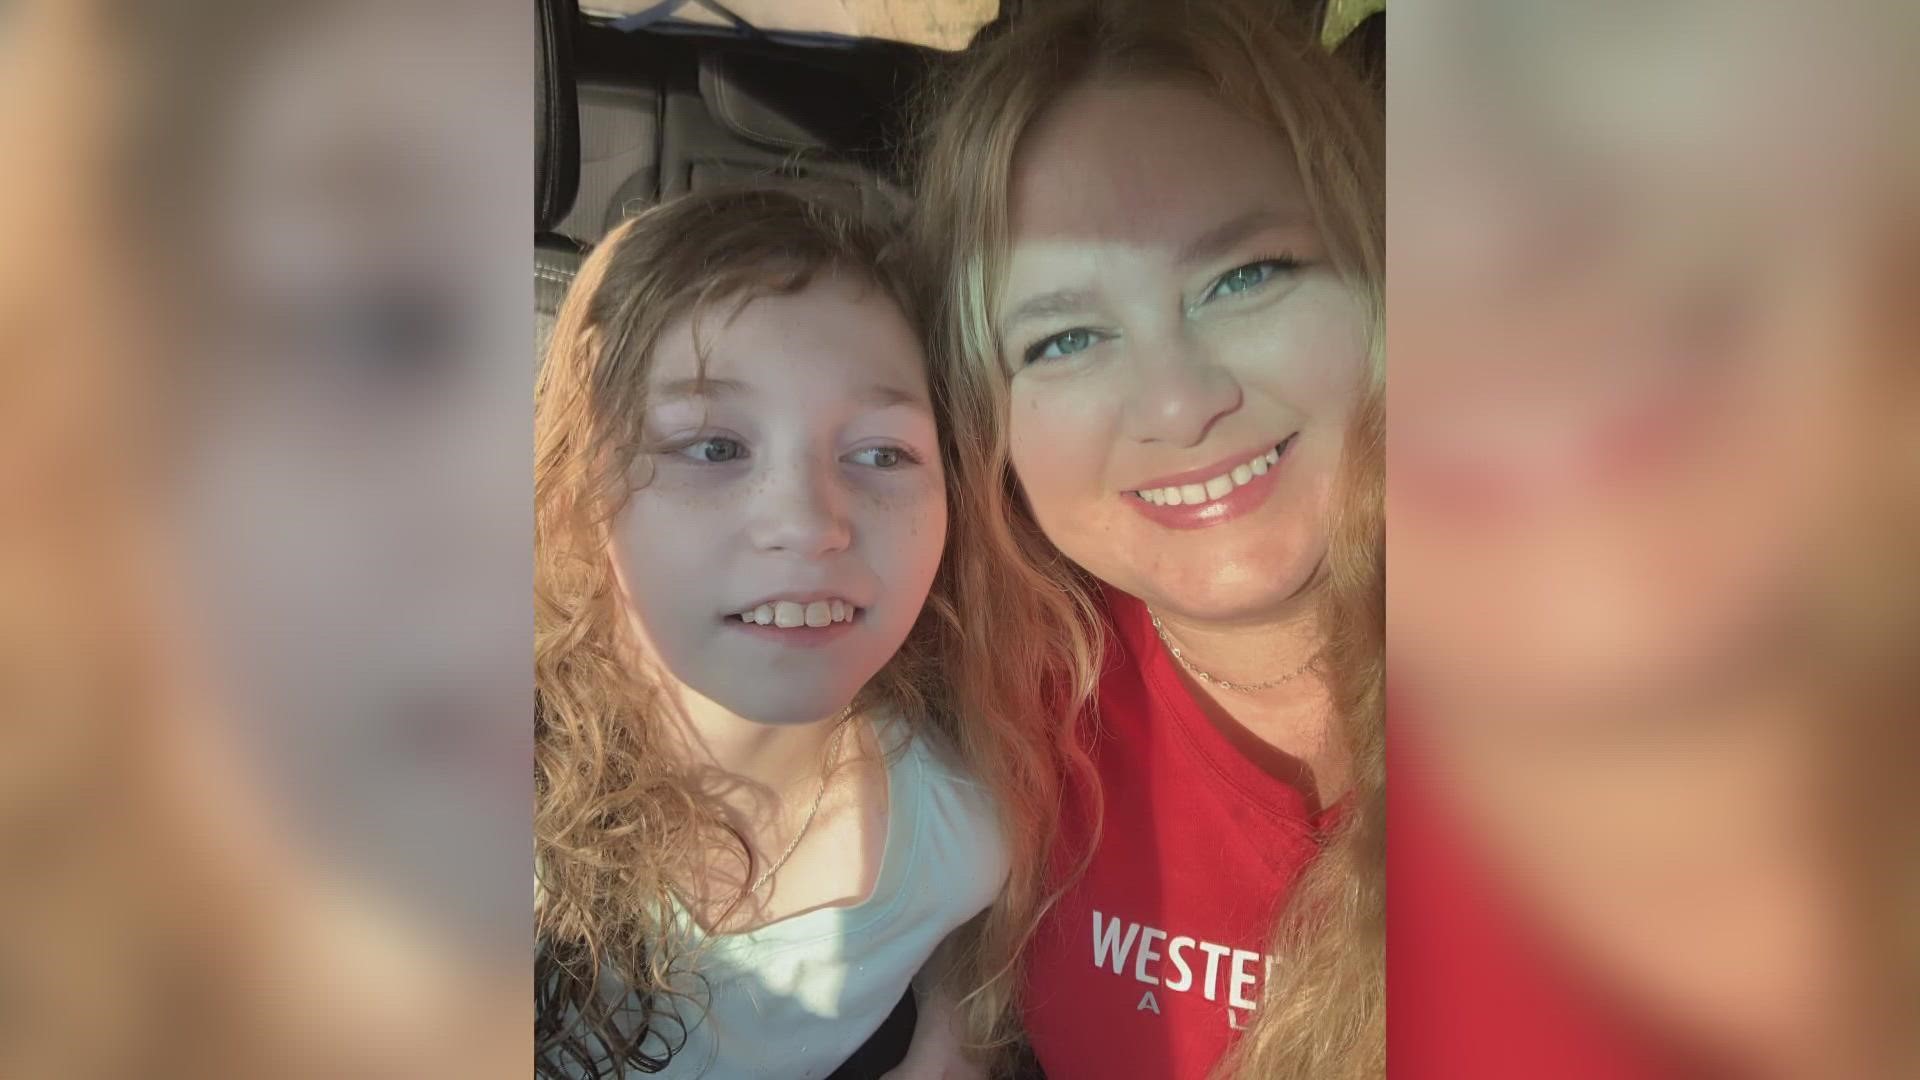 Kristin Wilcox has been advocating for medical marijuana since her daughter was diagnosed with a rare form of epilepsy.